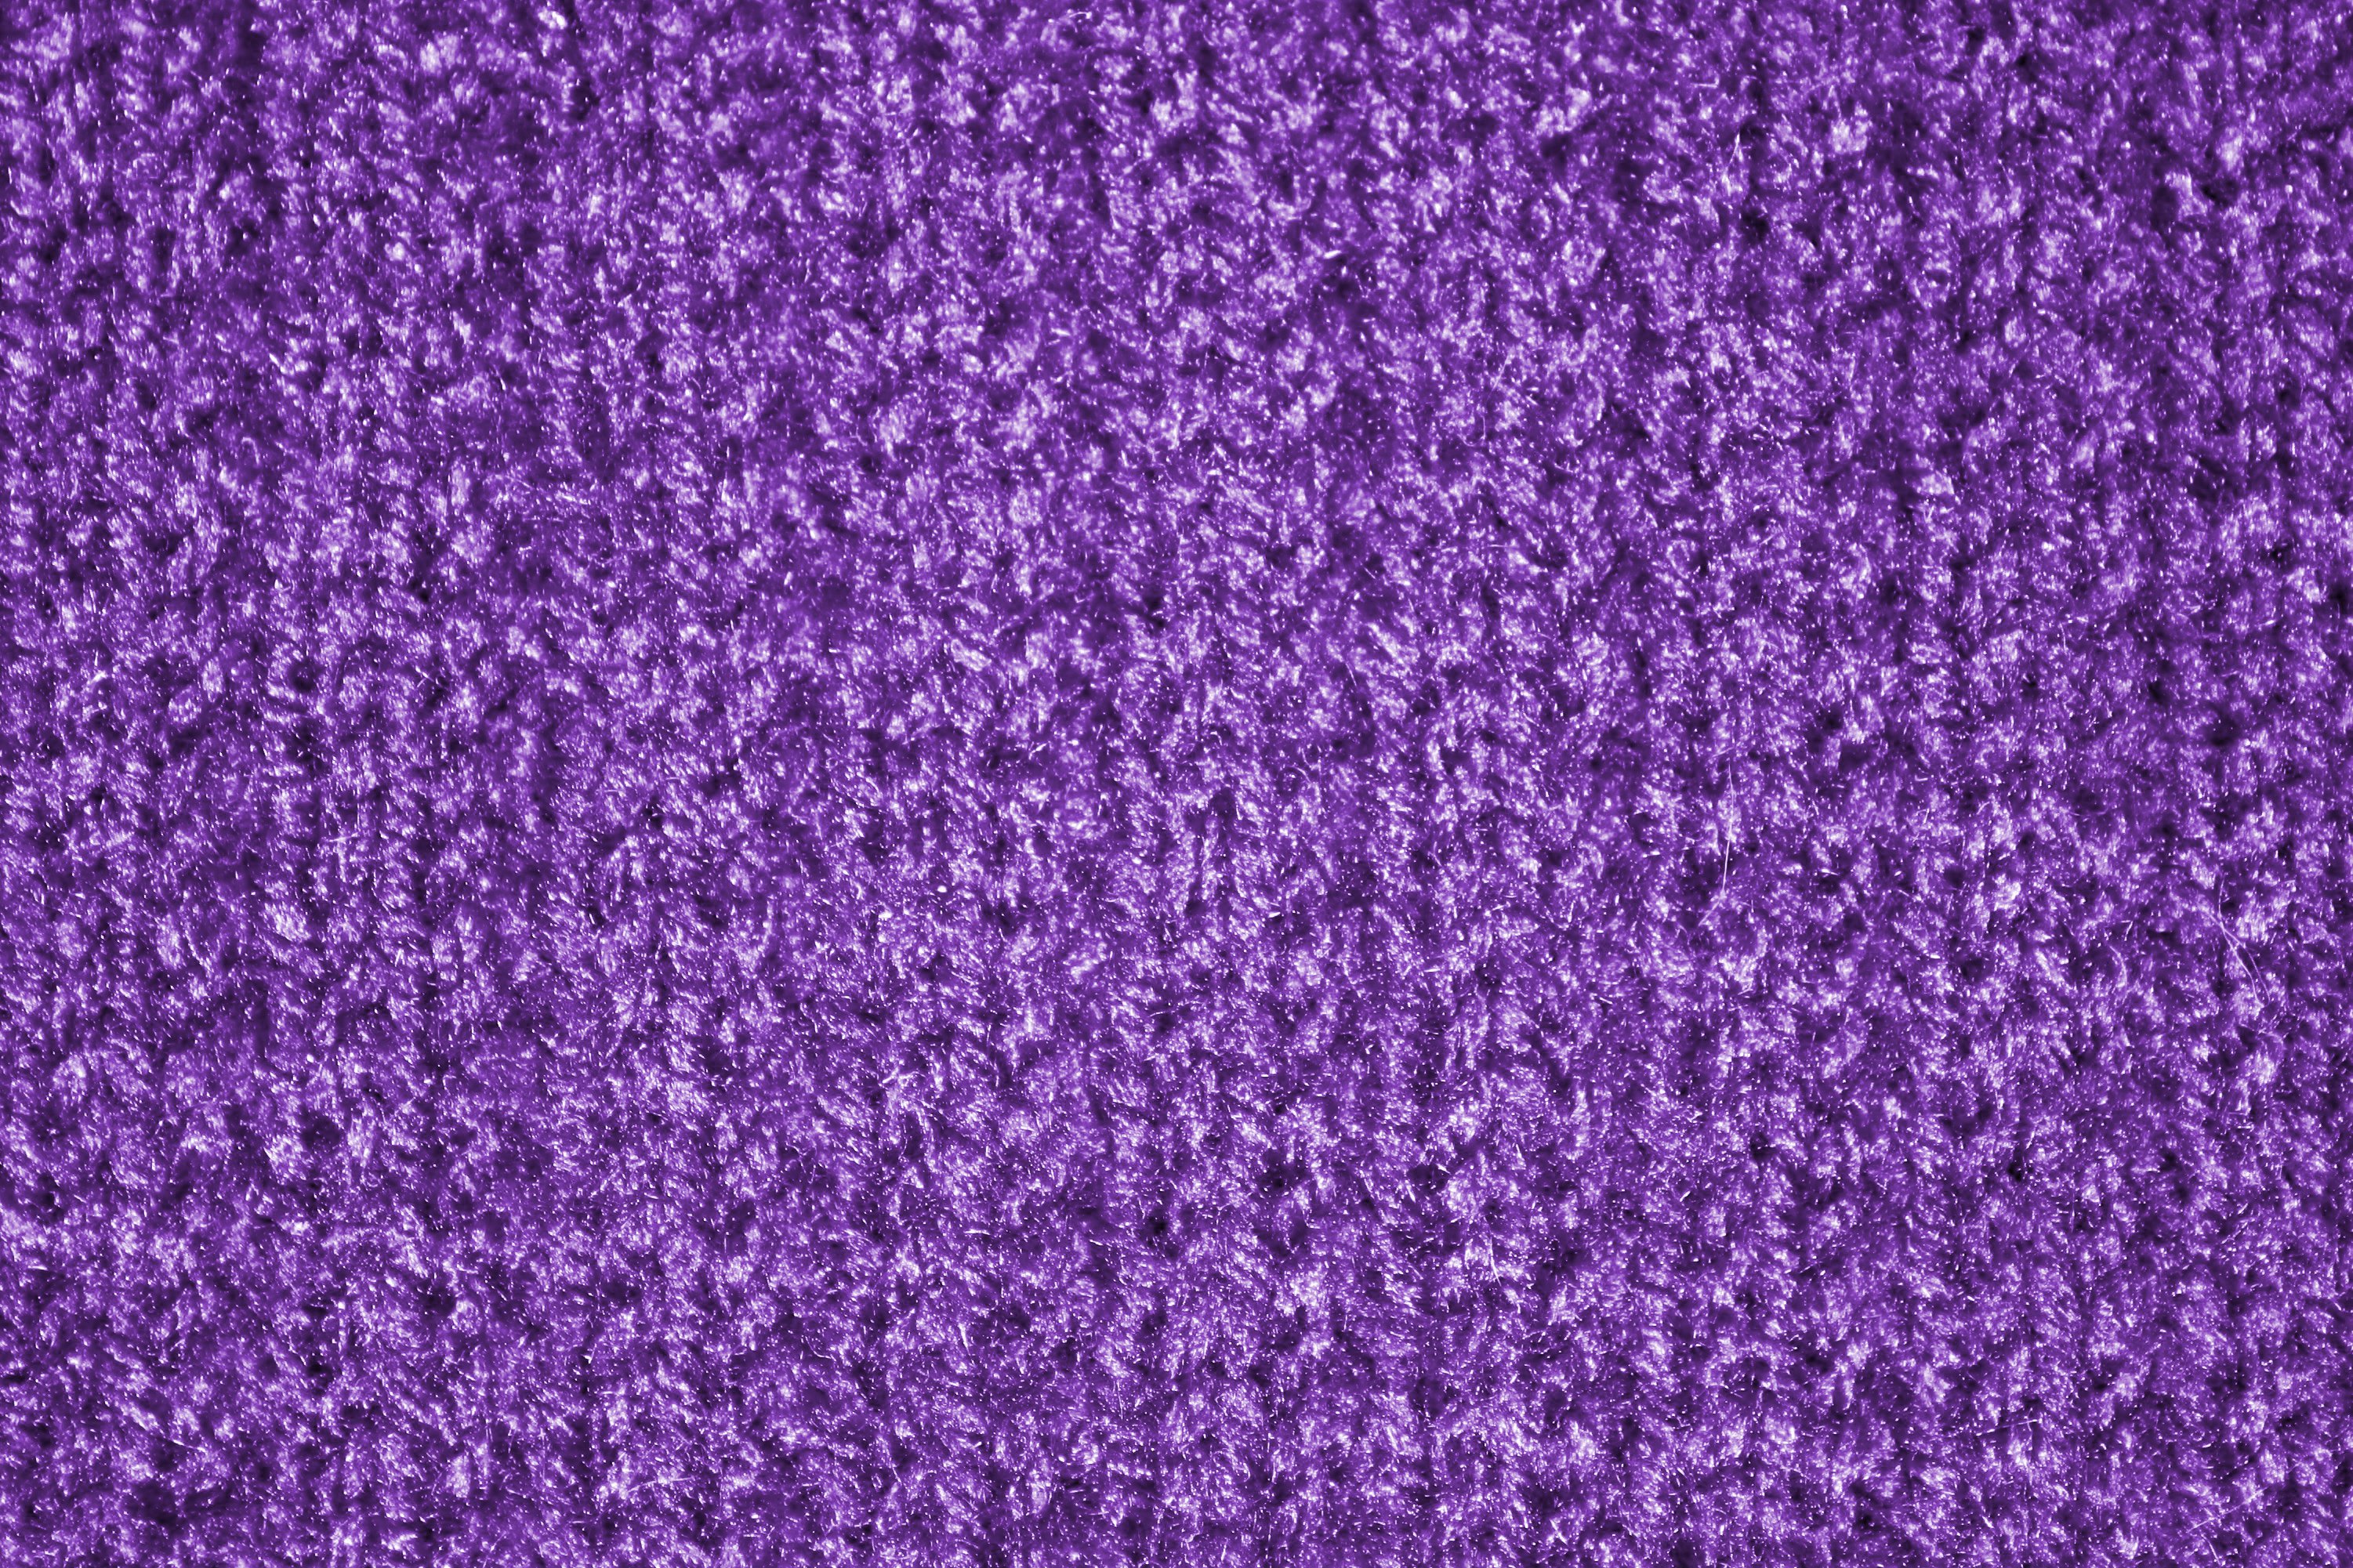 Purple knitted wool texture background image